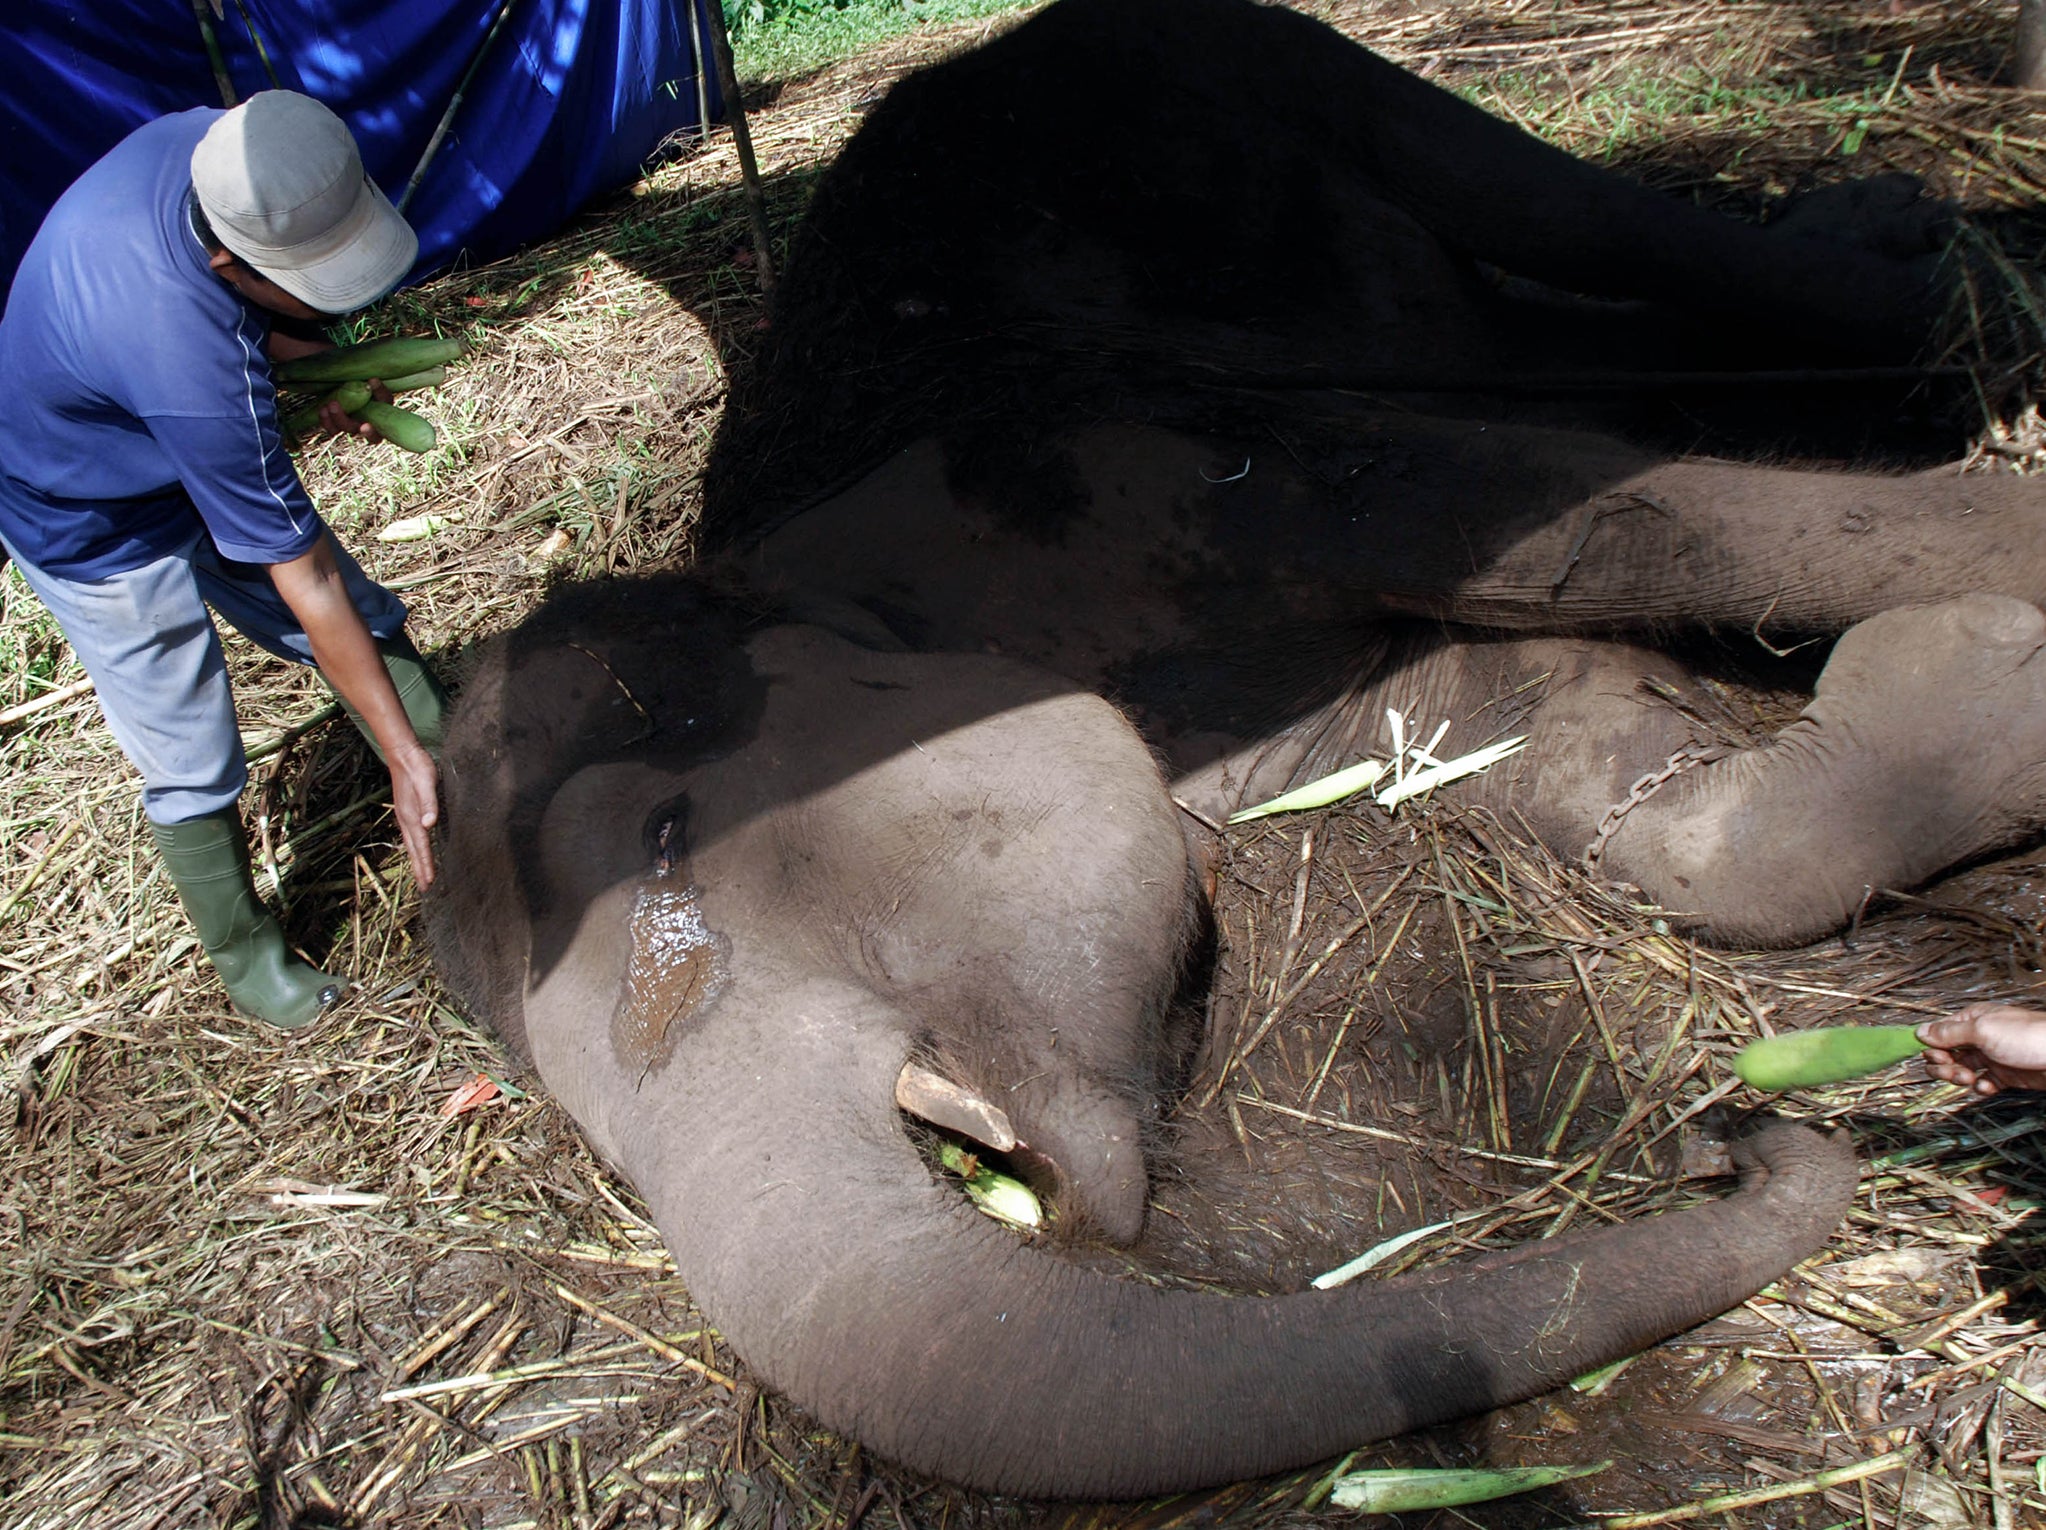 Sumatran female elephant, Yani, lies down on the ground in Bandung city's zoo, West Java province, several hours before eventually dying